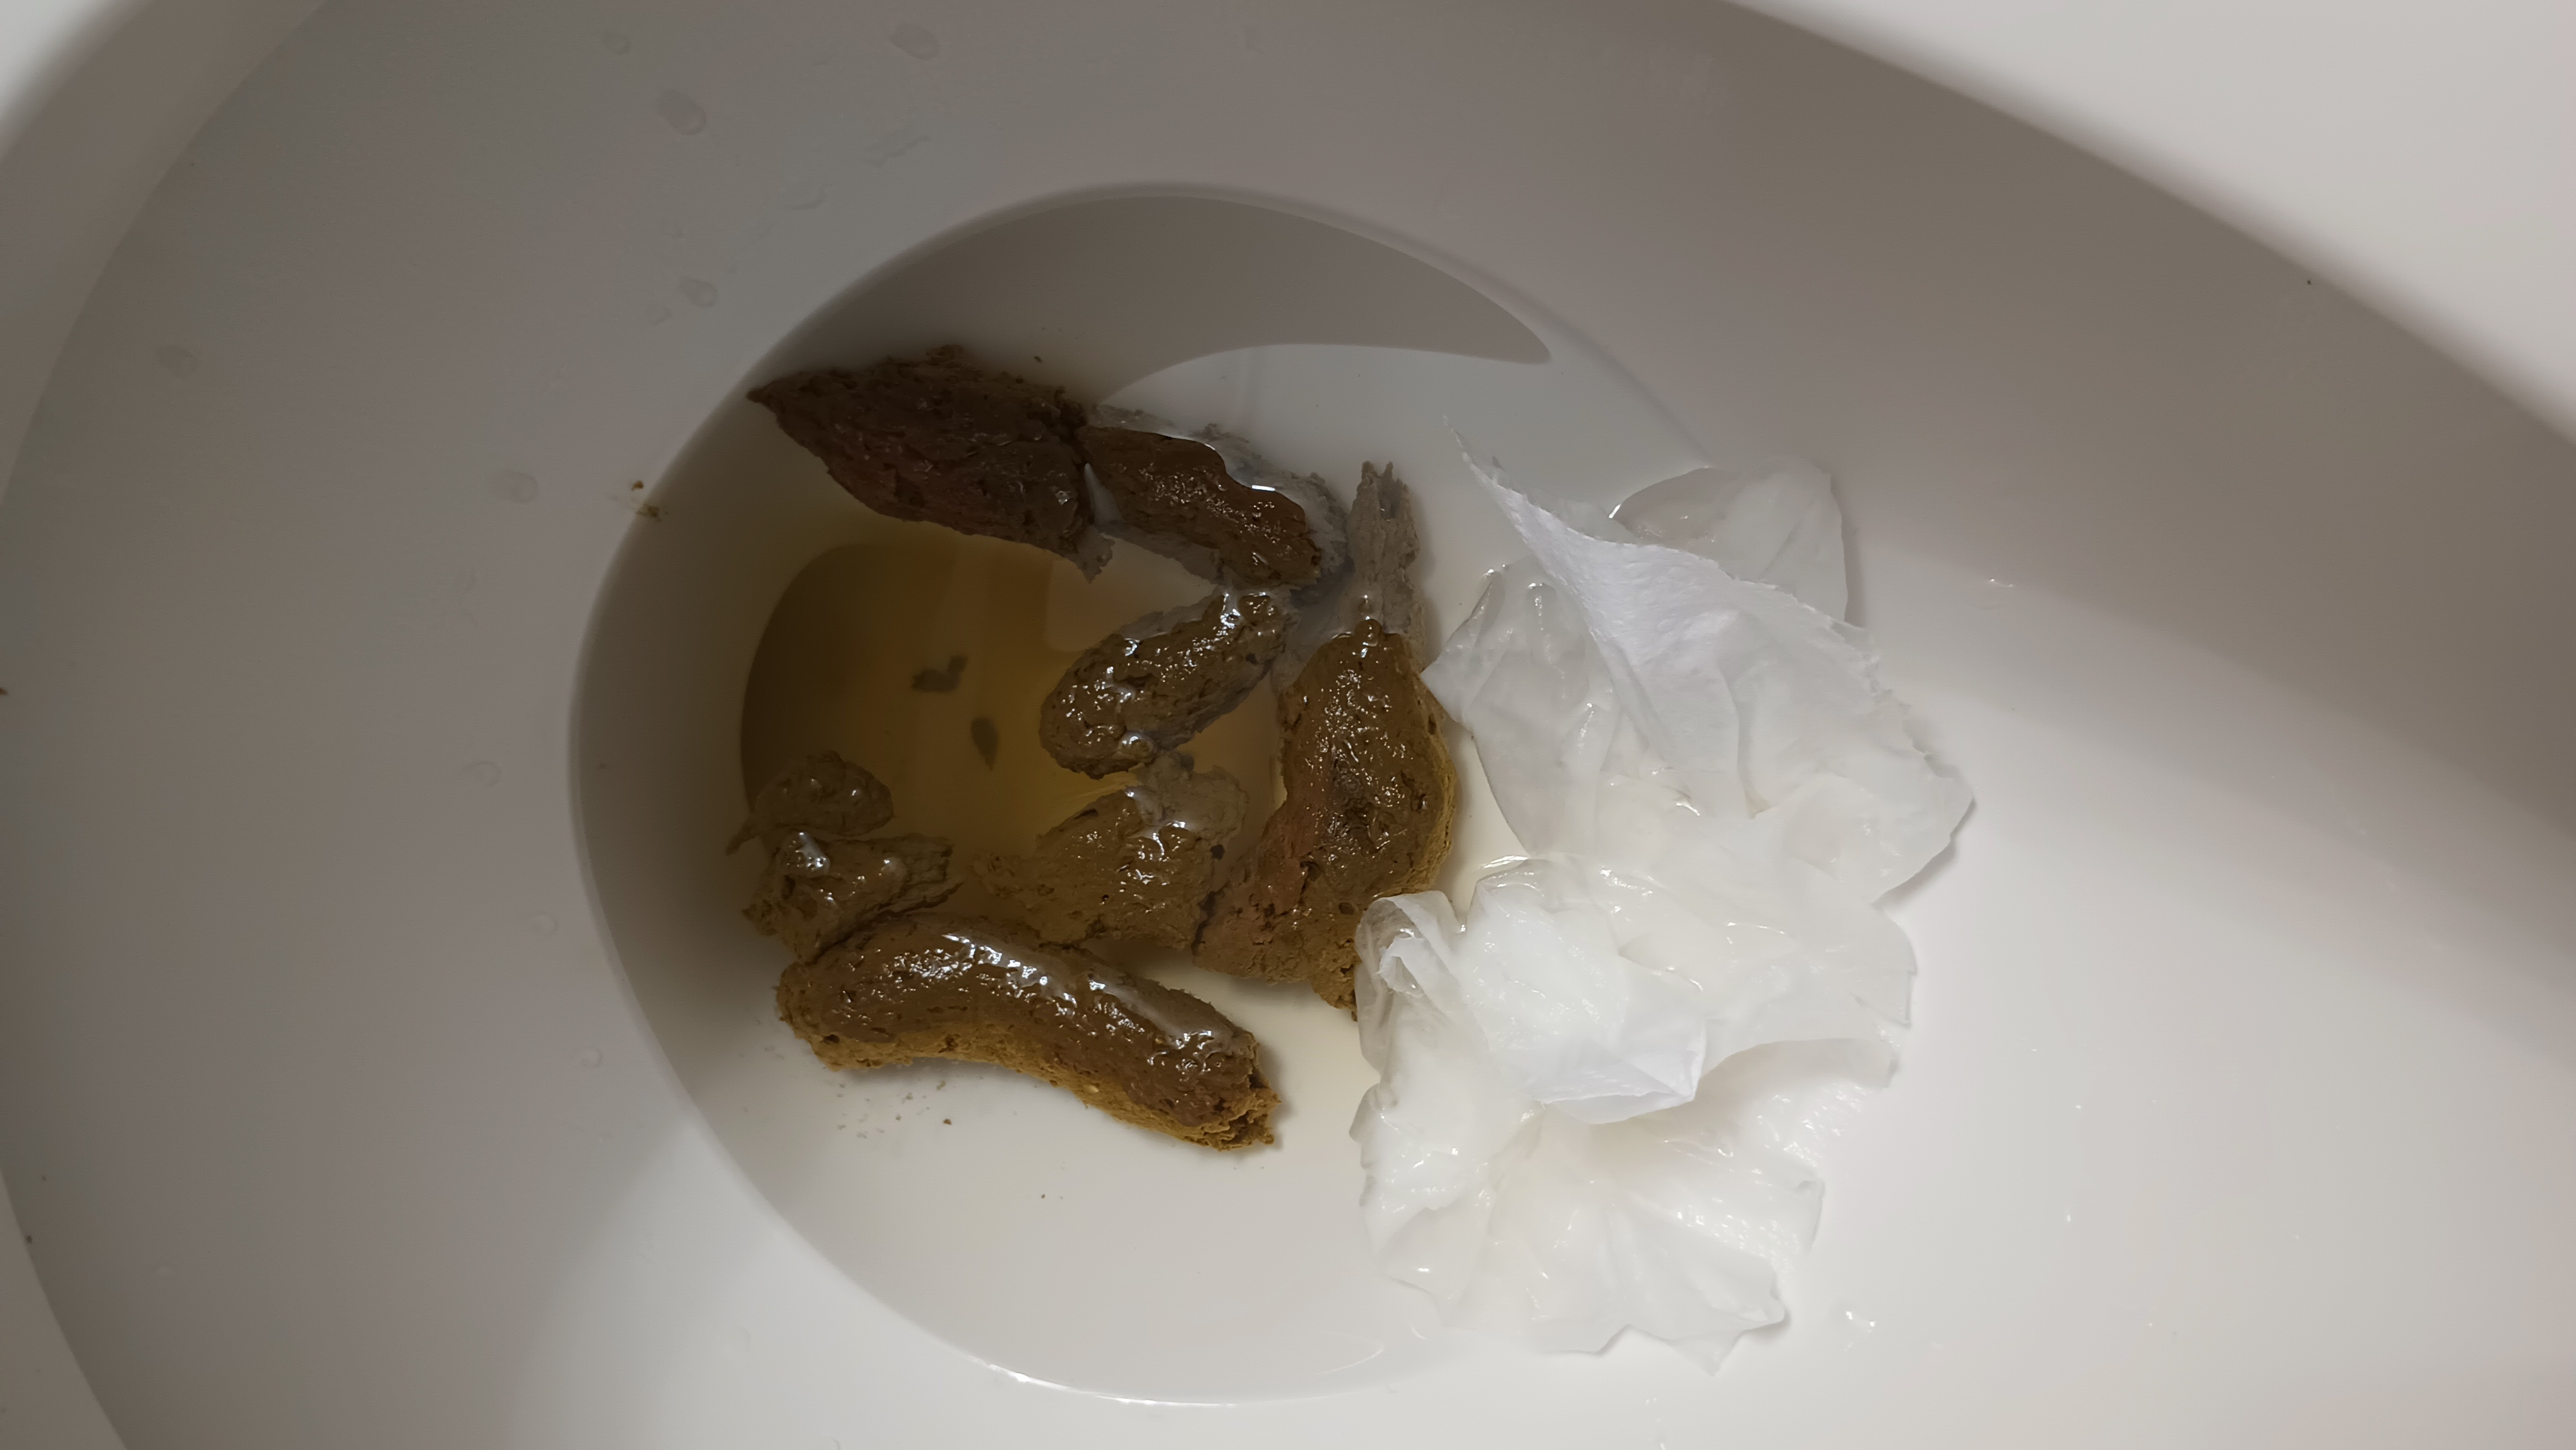 5-2-24 Smelly afternoon dump